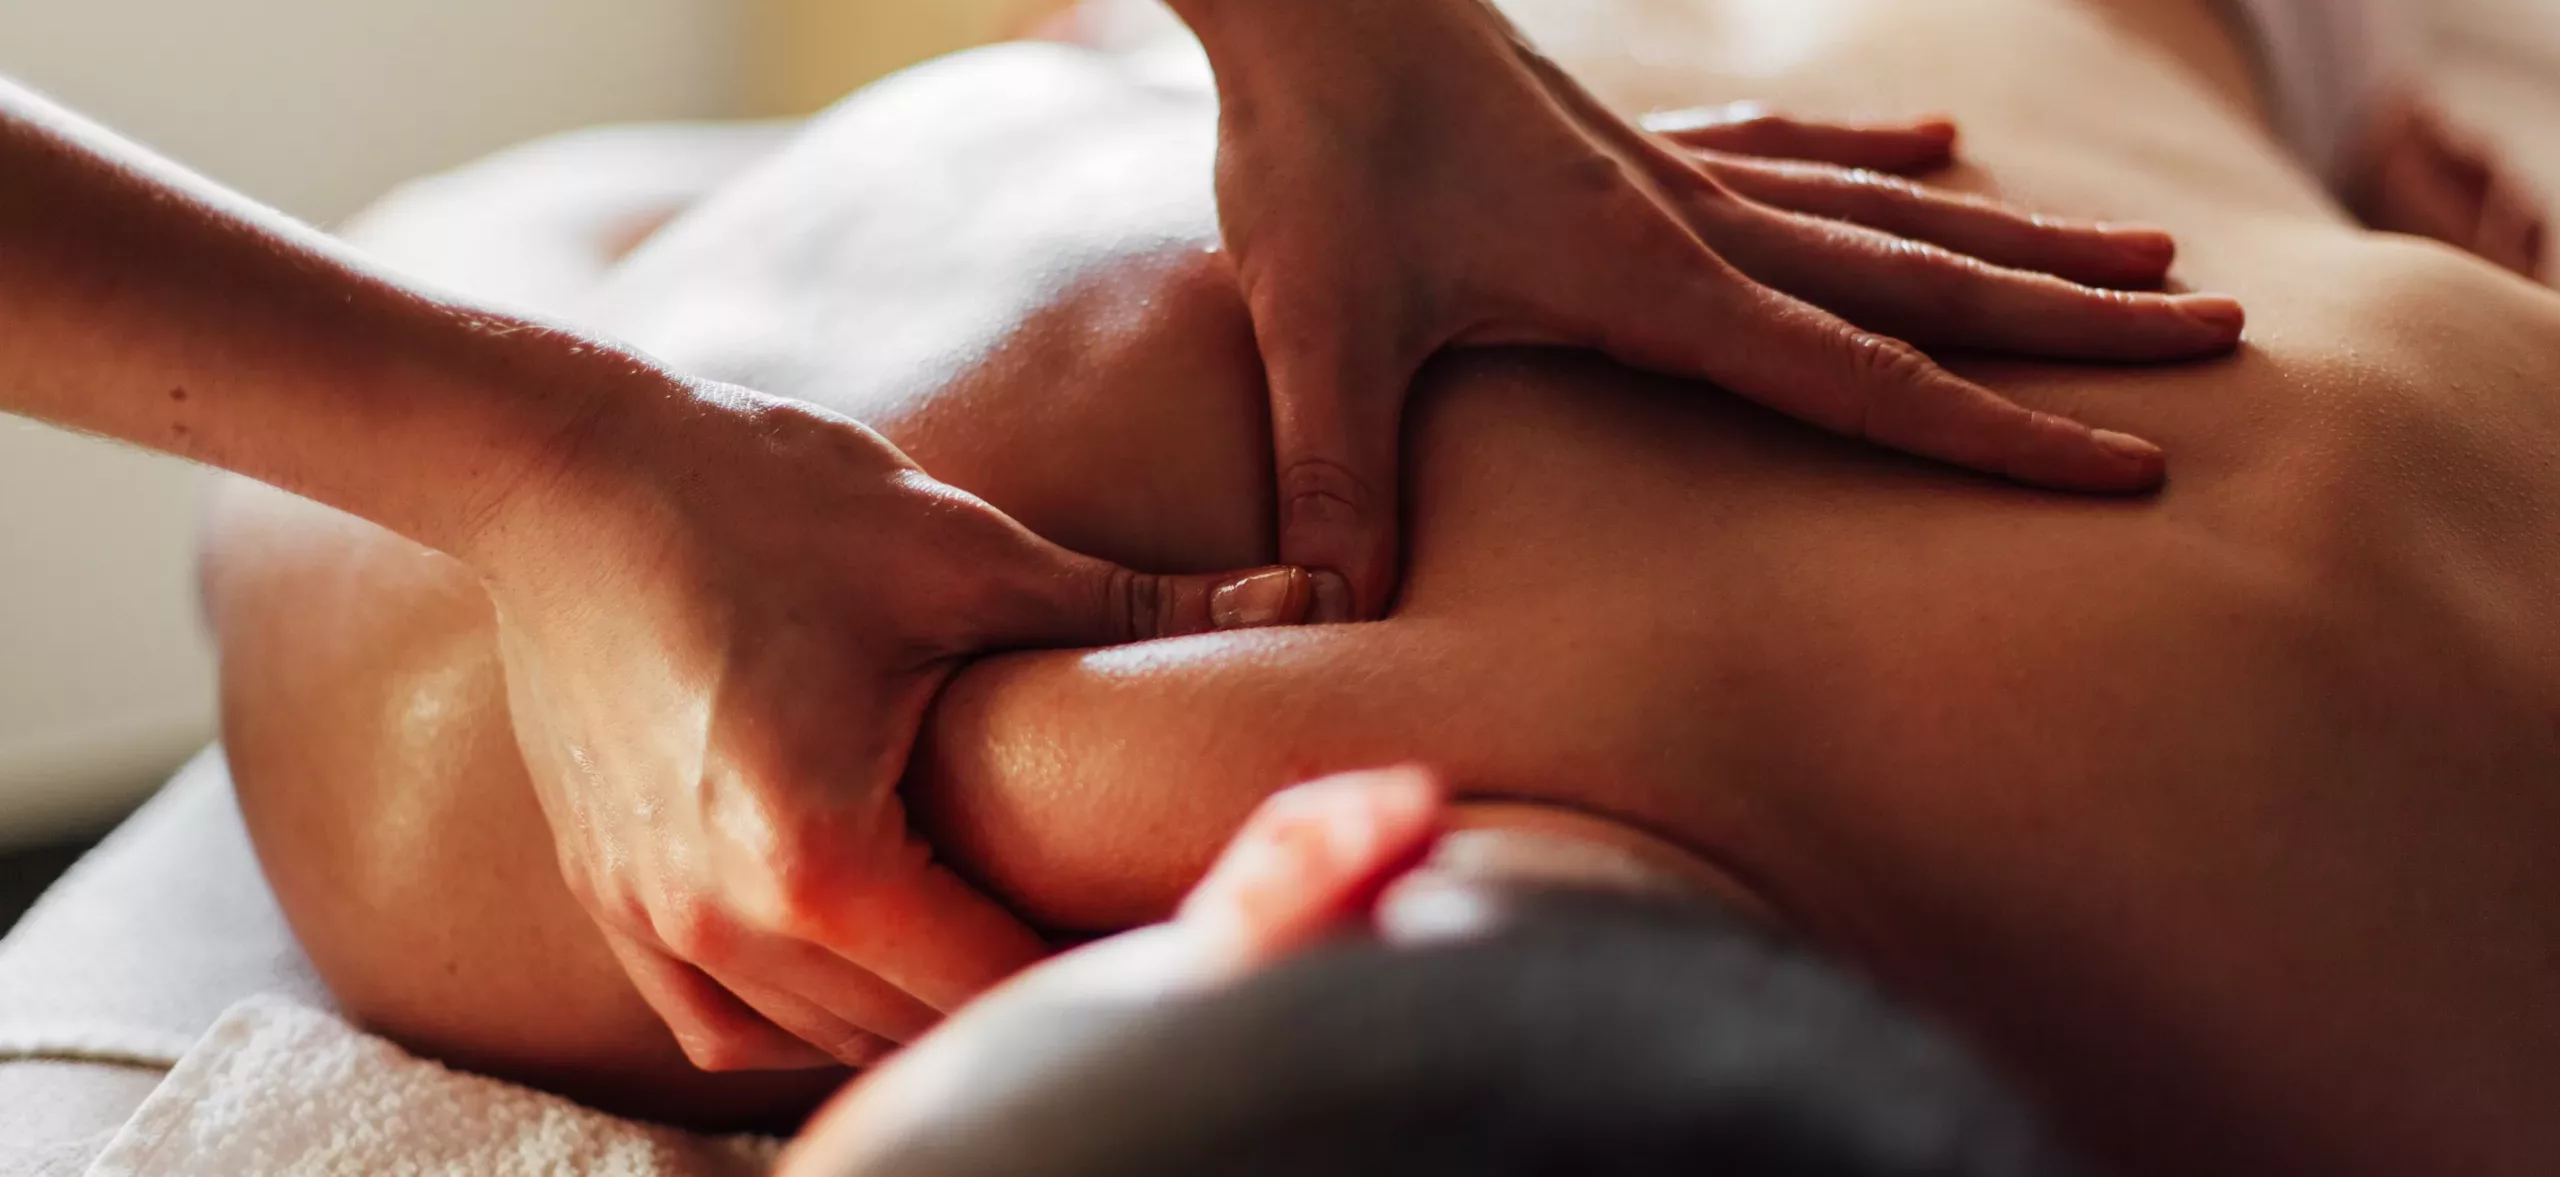 5 massage techniques to relieve tension at home, from a Philadelphia massage  therapist.